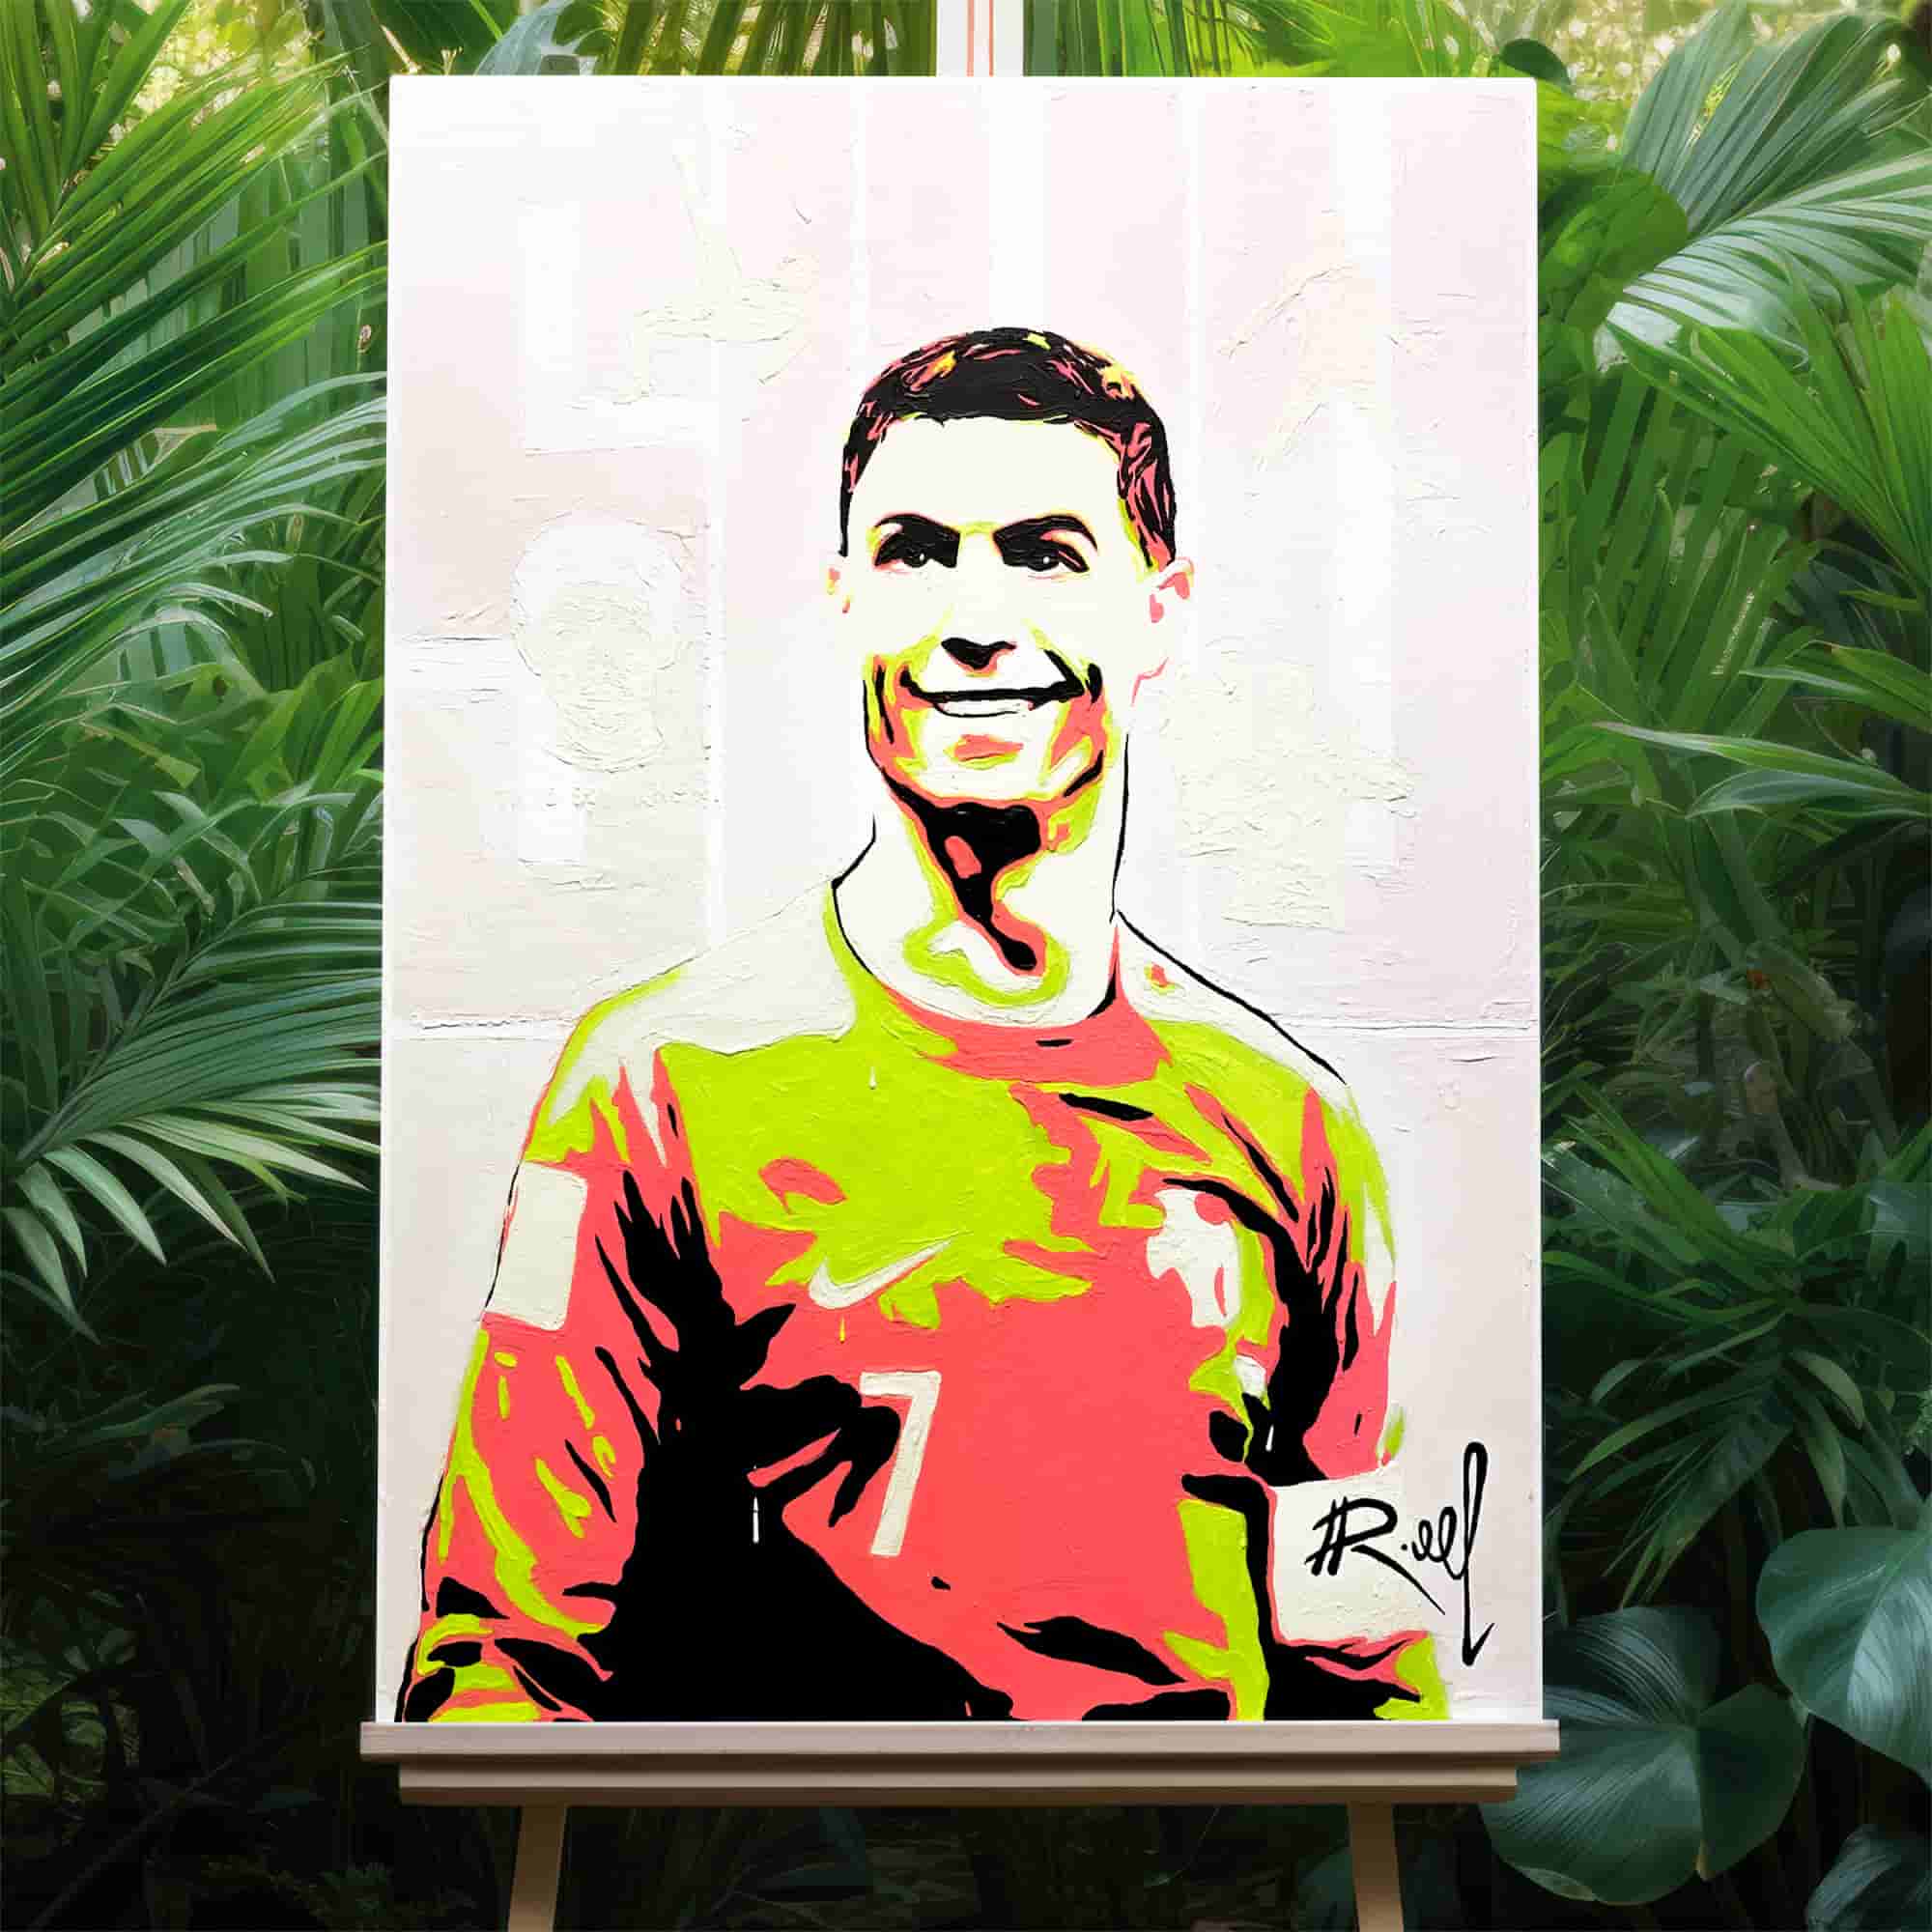 Glow in the dark Cristiano Ronaldo painting with green background